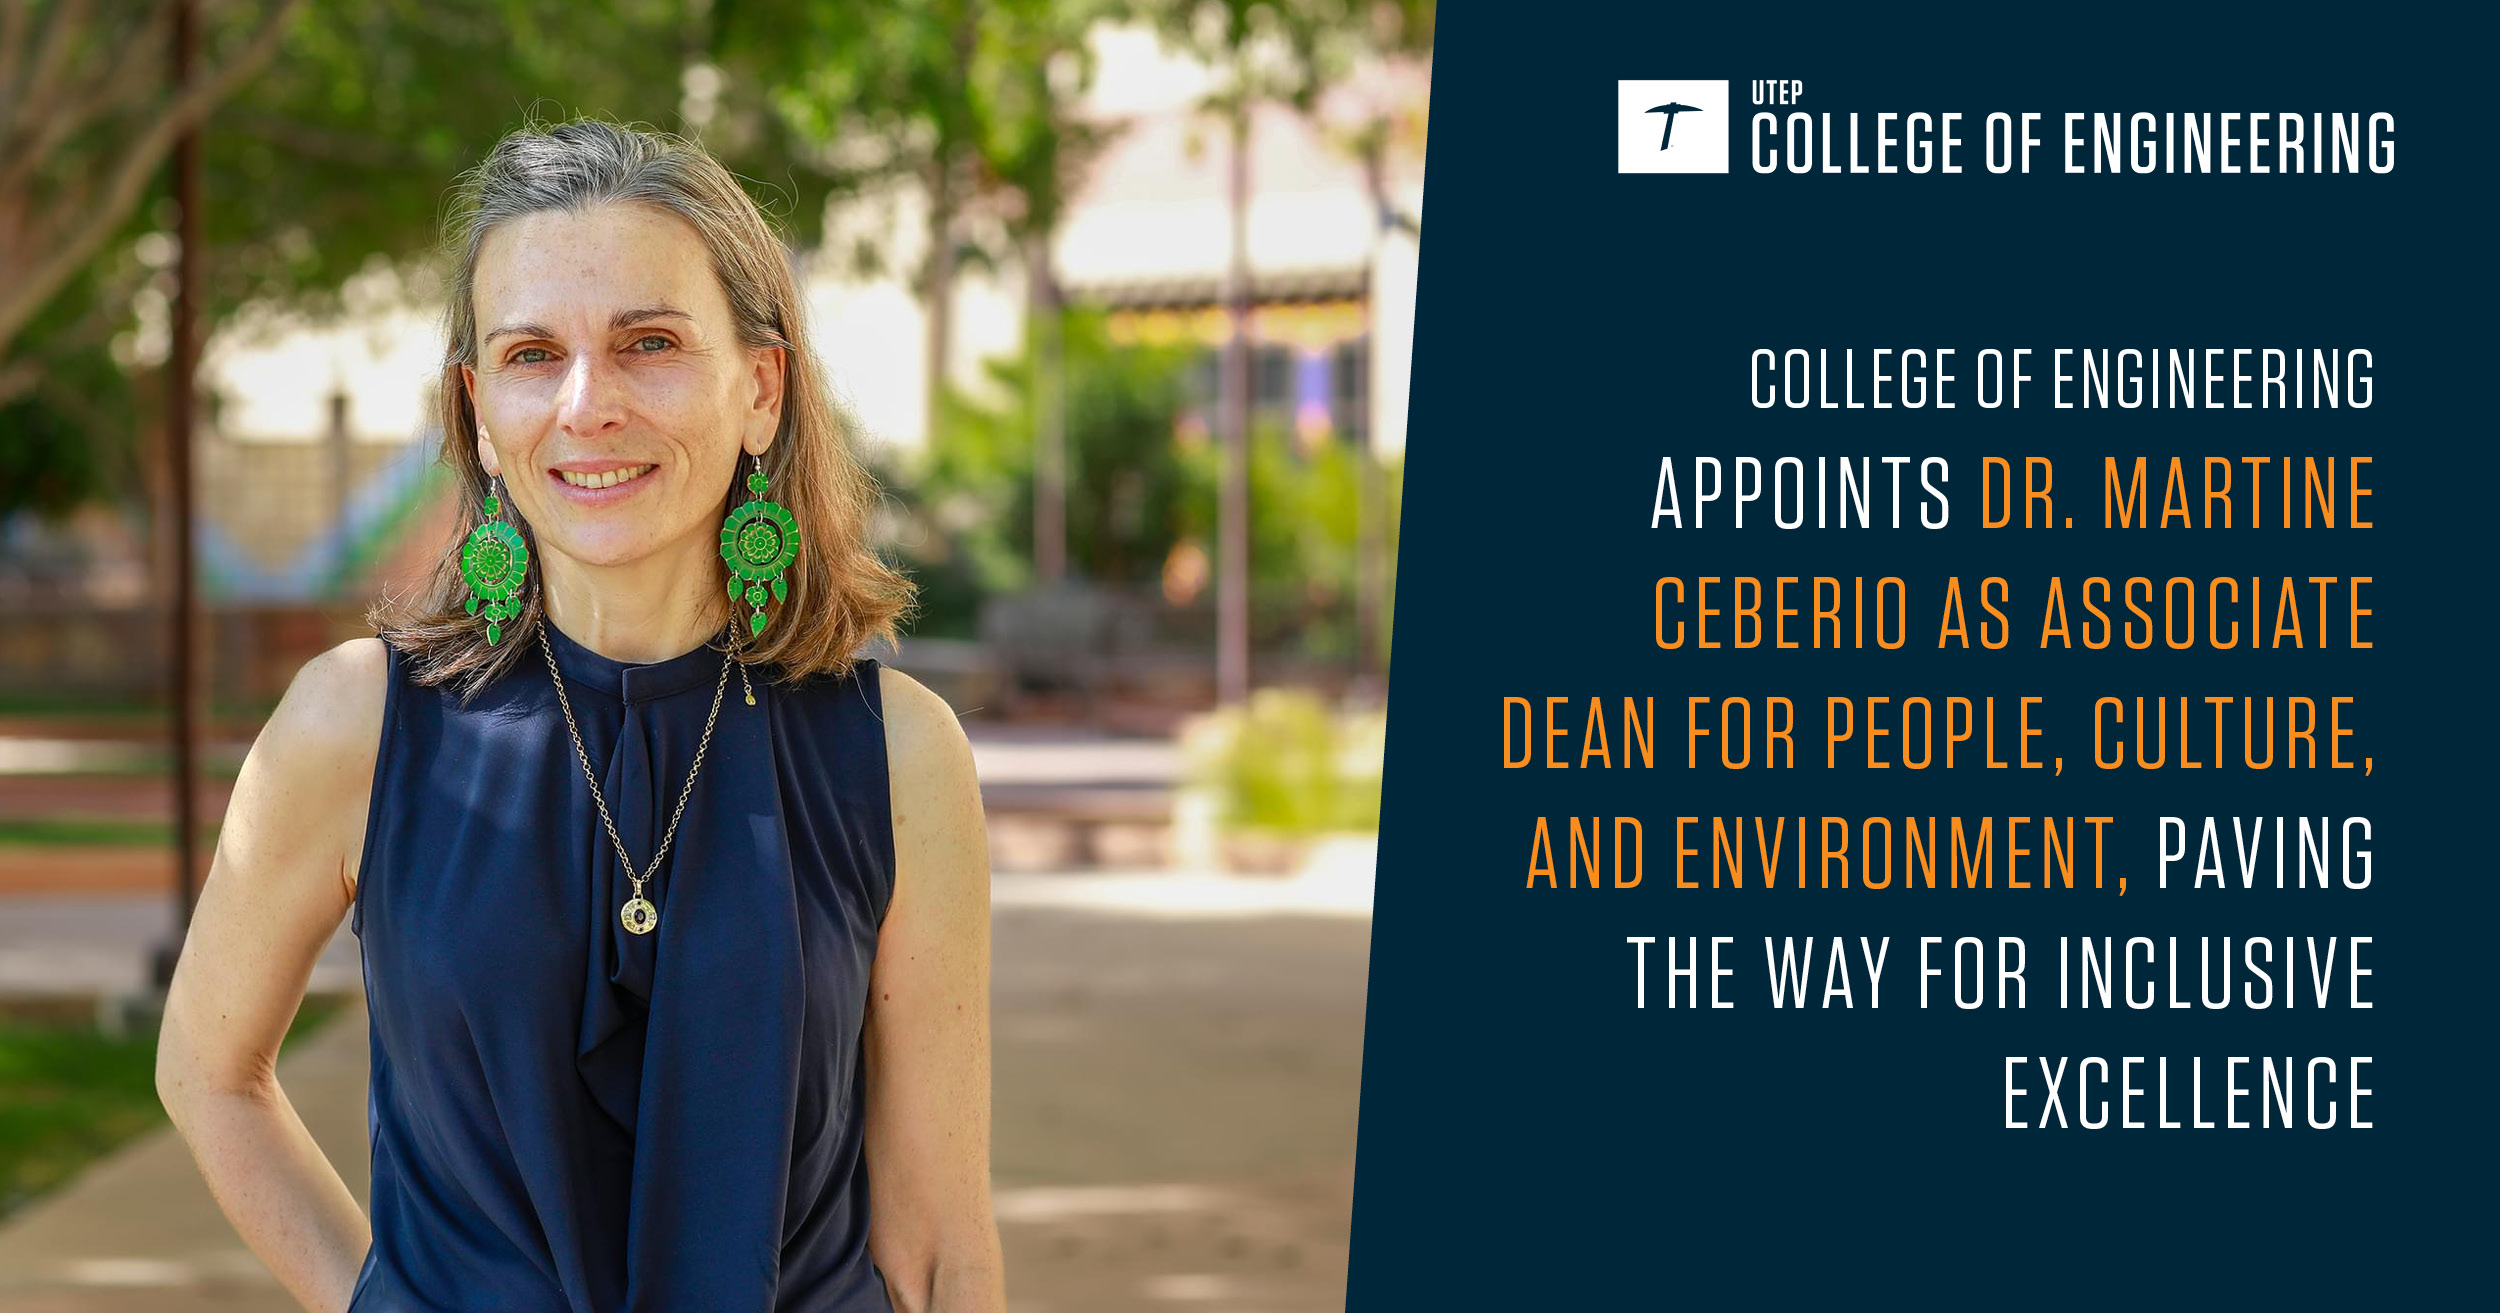 College of Engineering Appoints Dr. Martine Ceberio as Associate Dean for People, Culture, and Environment, Paving the Way for Inclusive Excellence